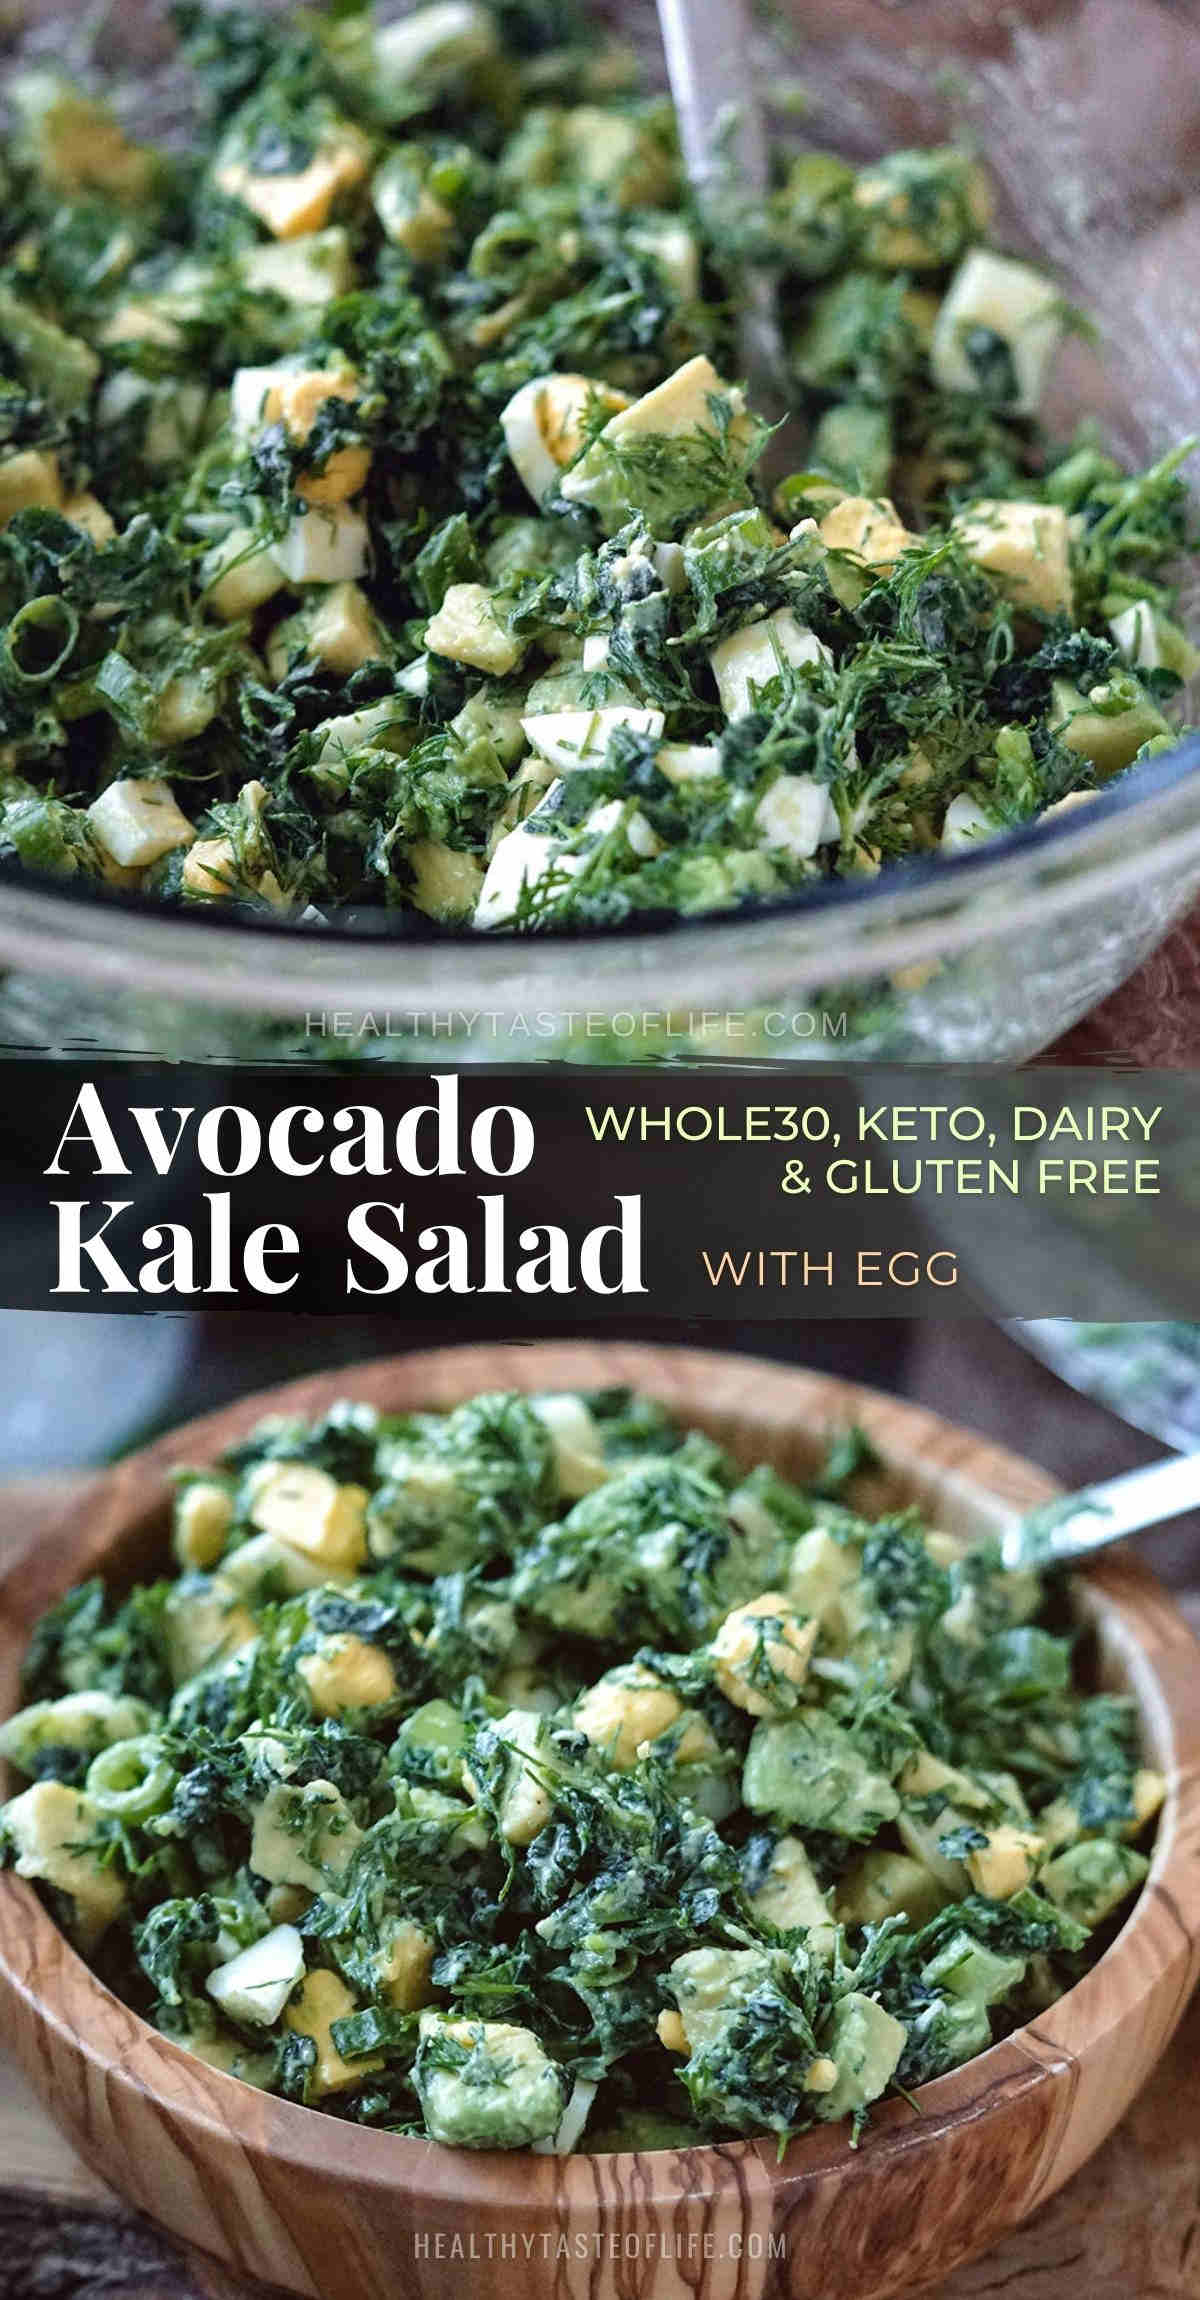 A creamy avocado kale salad: simple, delicious, creamy kale salad with avocado that comes together in just 15 minutes – whole30 and keto friendly. This healthy avocado kale salad recipe features finely chopped massaged kale, avocado, scallions, hard boiled eggs and finished with a lemony dressing. Whenever you’re looking for kale or avocado recipes this simple kale salad with avocado can turn into a favored meal. #kaleavocadosalad #avocadokalesalad #whole30kalesalad #ketokalesalad #kalesalad